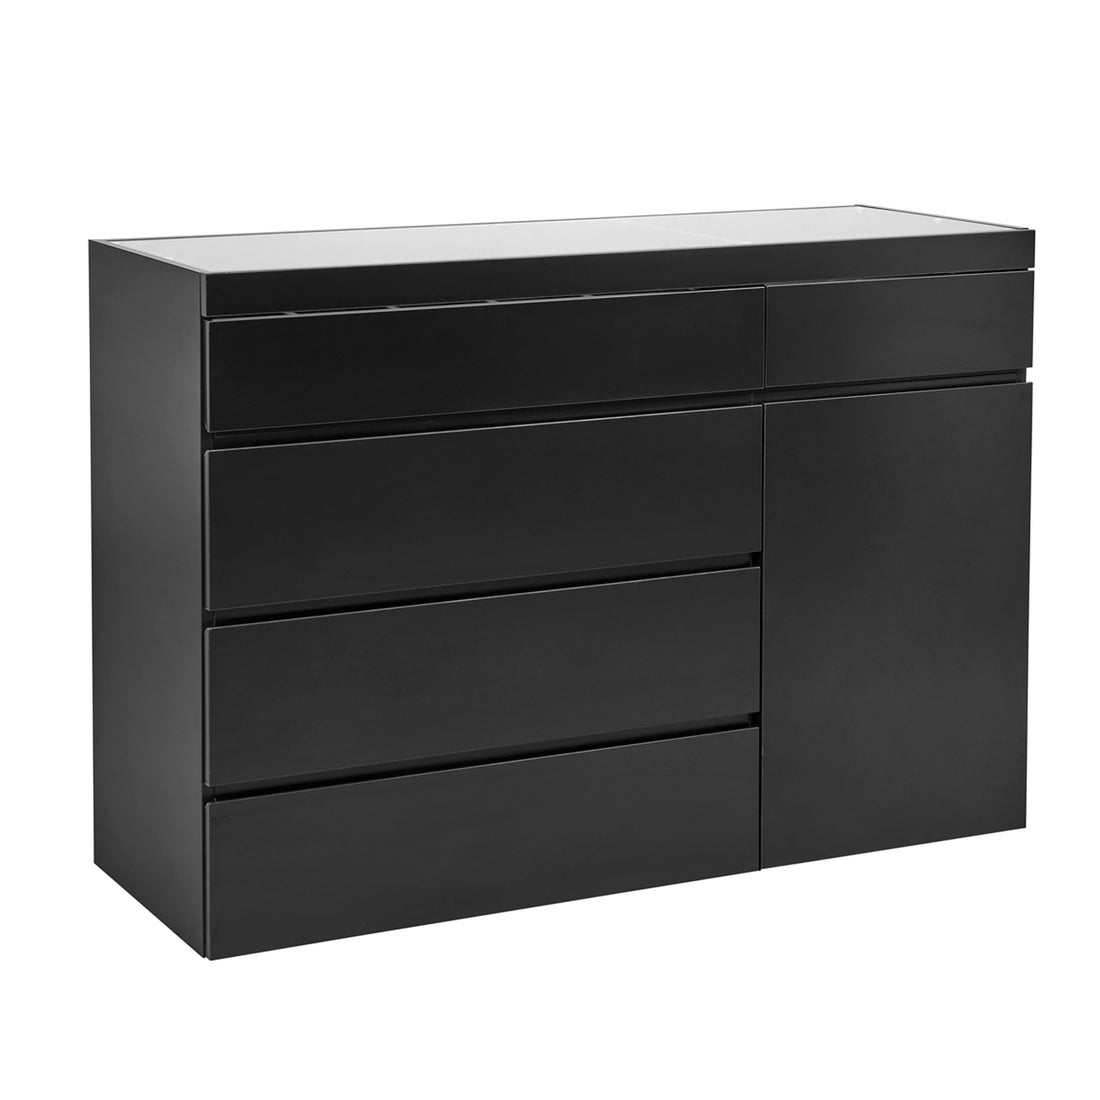 SlayStation® Credenza Vanity Display Chest with Drawers